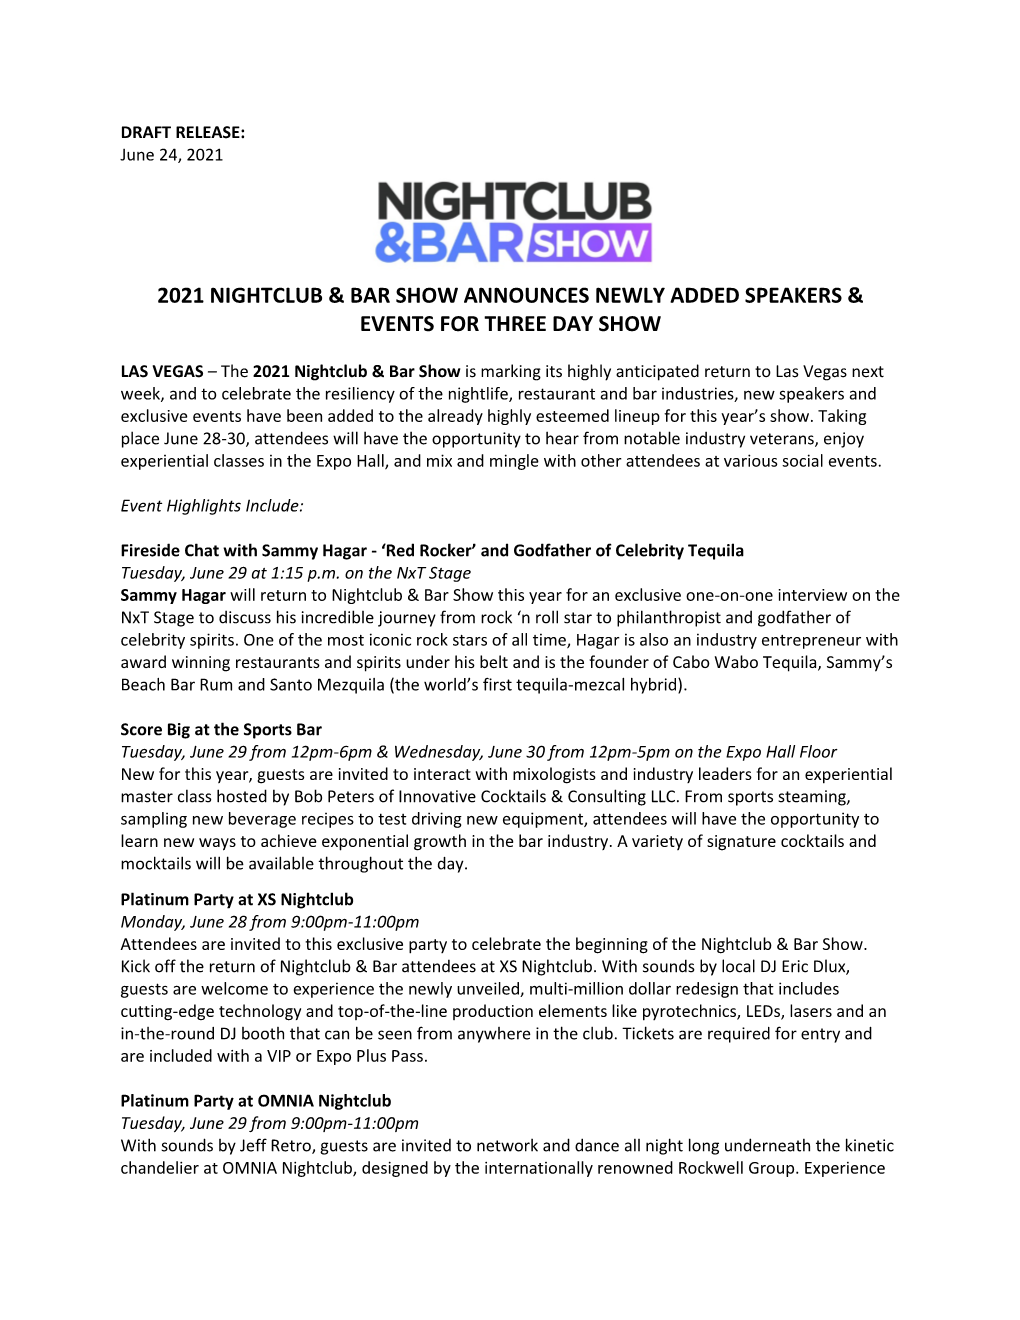 2021 Nightclub & Bar Show Announces Newly Added Speakers & Events For